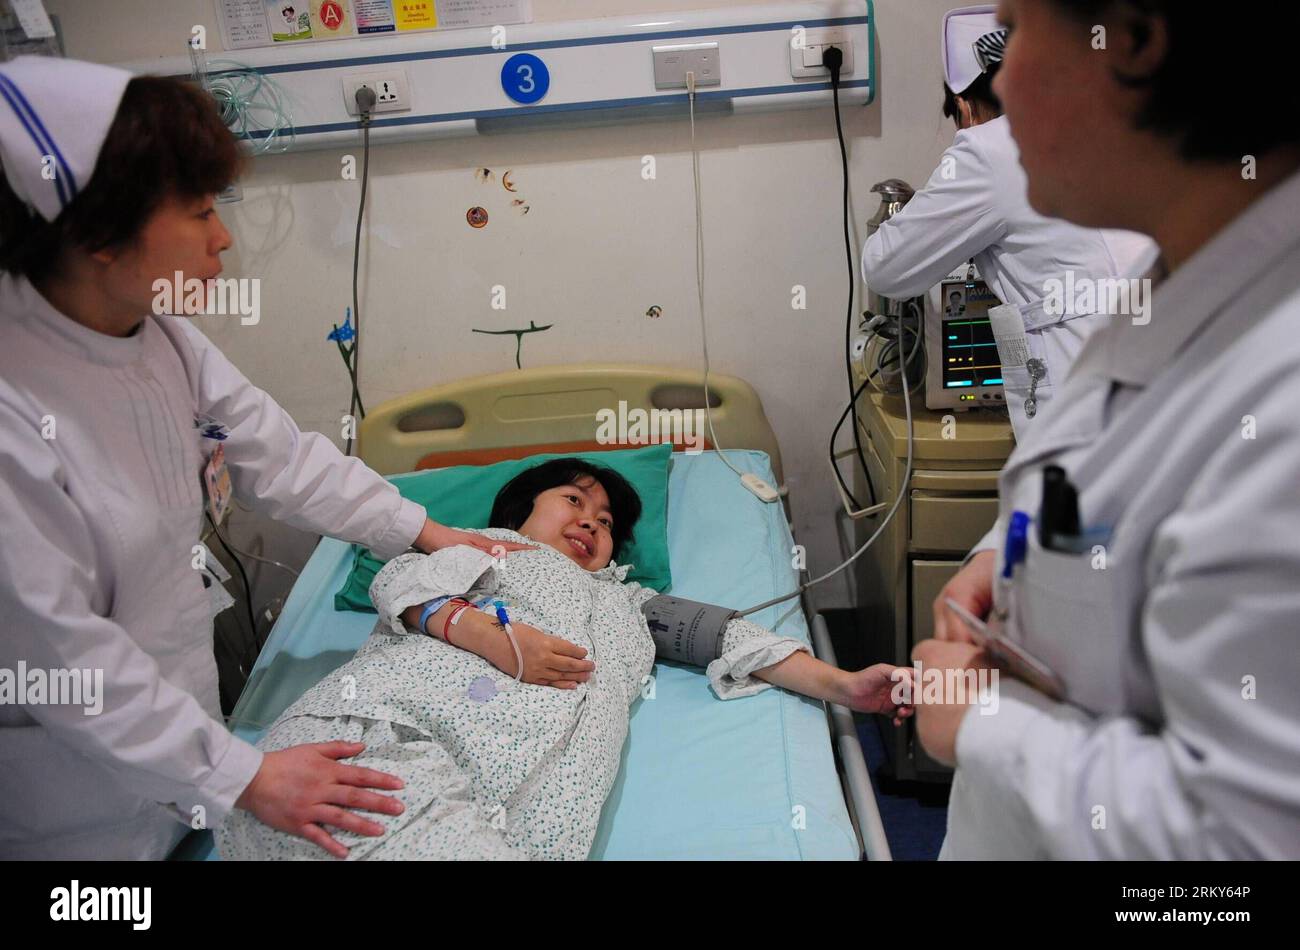 Bildnummer: 59154381  Datum: 30.01.2013  Copyright: imago/Xinhua (130130) -- BEIJING, Jan. 30, 2013 (Xinhua) -- Doctors check the condition of Lyu Yuanfang, a woman with Lou Gehrig s disease, before a Cesarean section in Beijing, capital of China, Jan. 30, 2013. Lyu Yuanfang gave birth to a baby boy Wednesday morning at a hospital in Beijing. Lyu, 31, has Lou Gehrig s disease, also known as amyotrophic lateral sclerosis (ALS), a fatal, incurable neuromuscular disease that progresses rapidly. Lyu is believed to be the first ALS sufferer to give birth in China. ALS strikes one to three in every Stock Photo